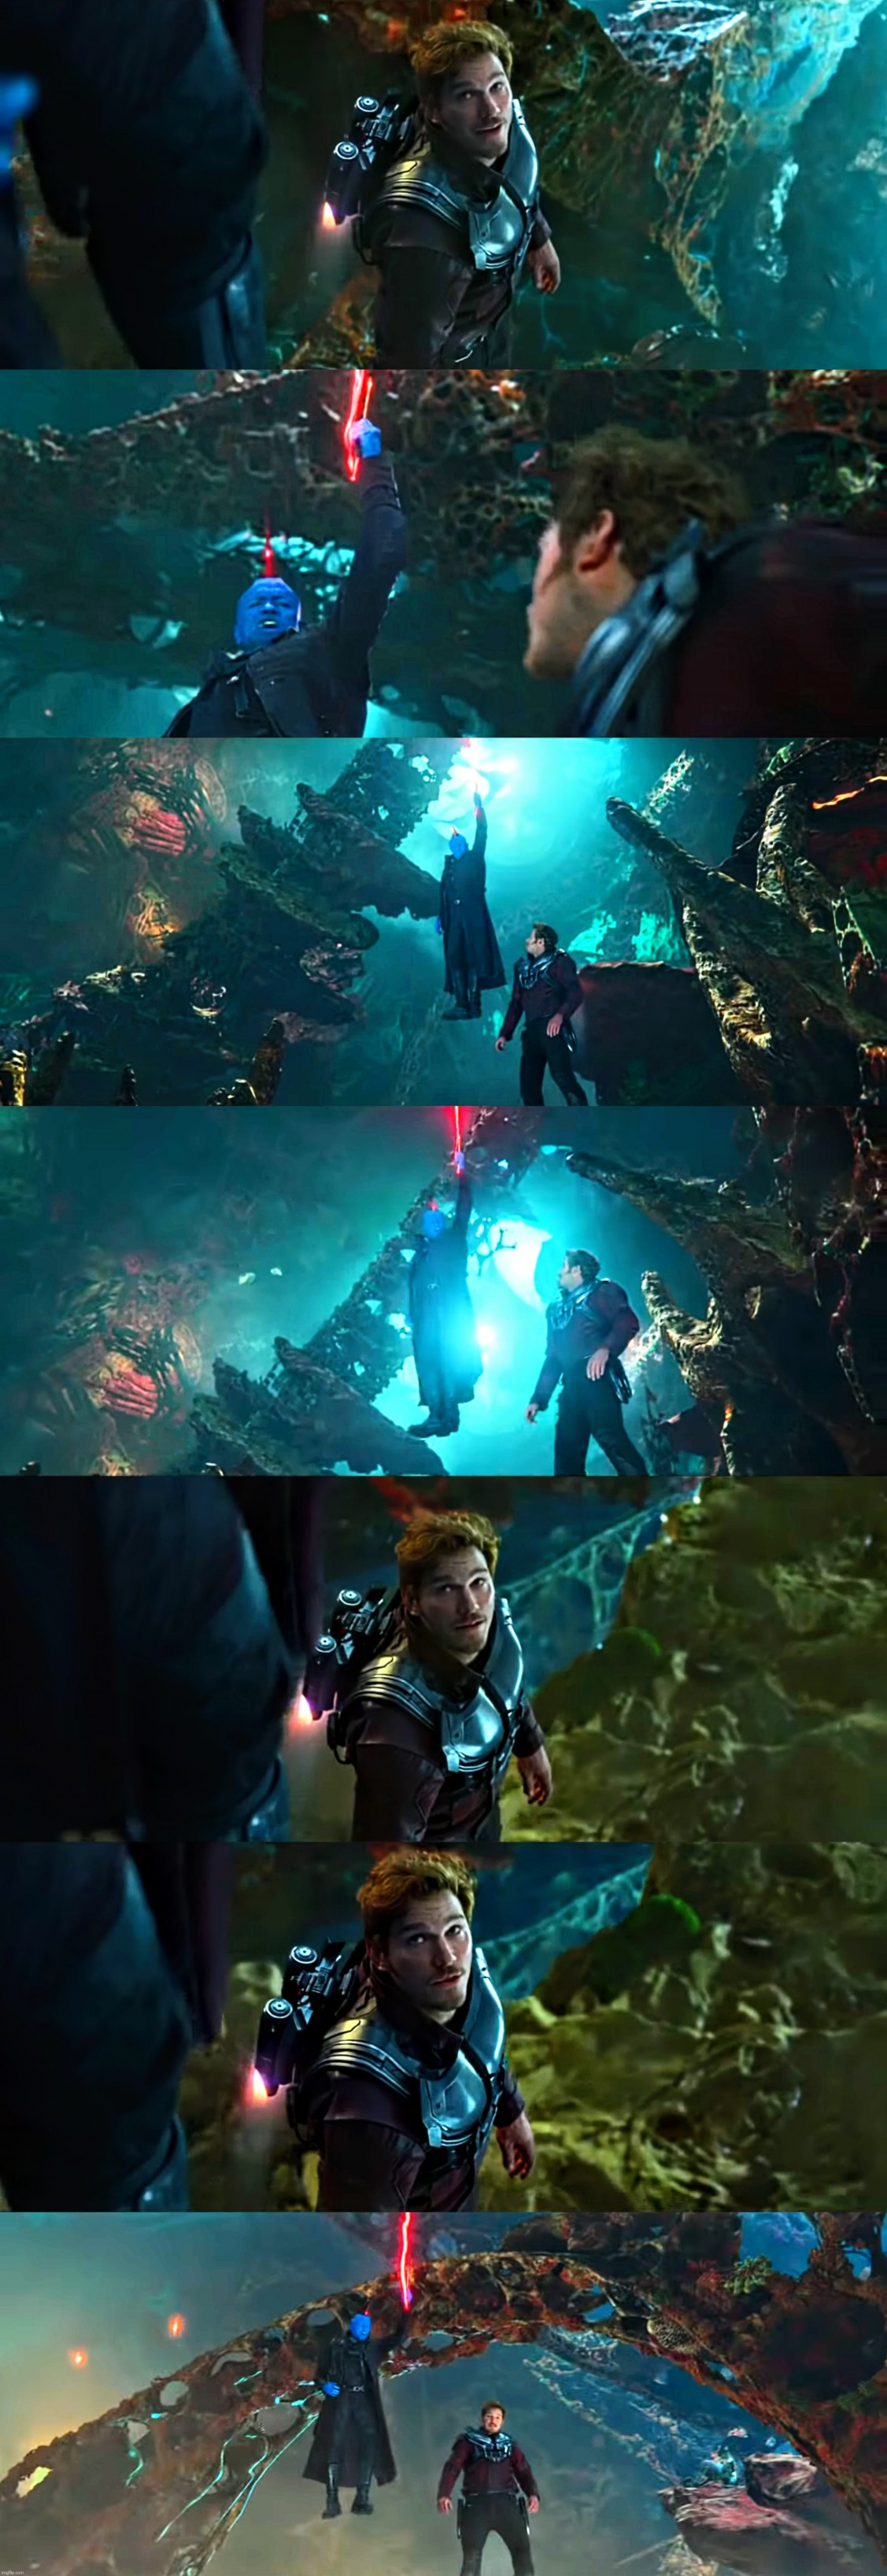 I'm Mary Poppins y'all Blank Meme Template